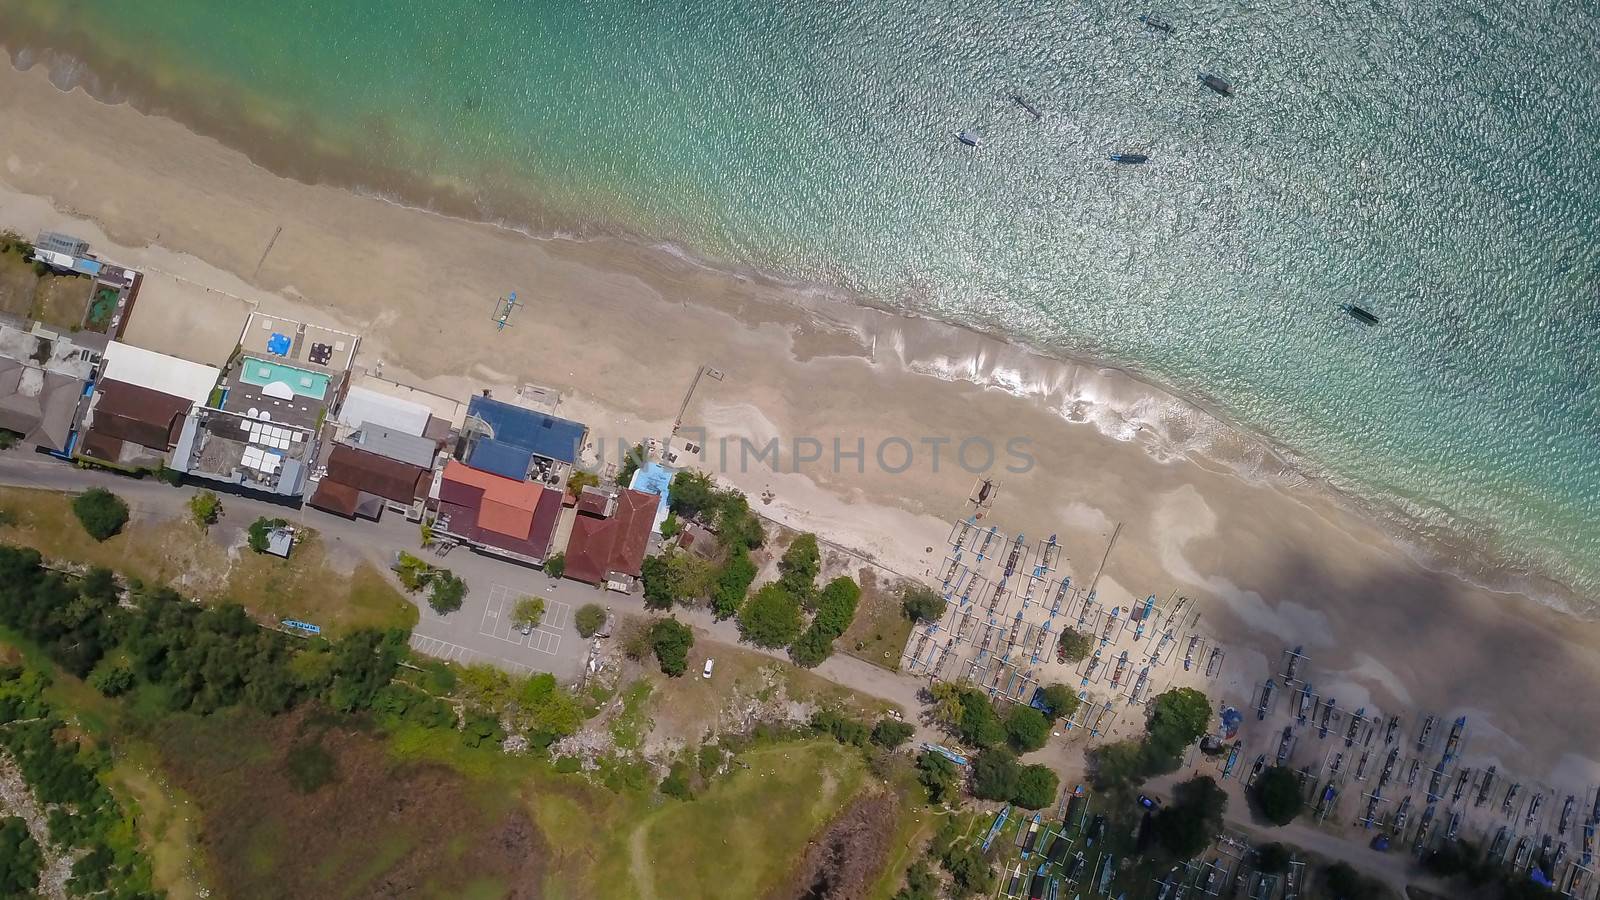 Aerial drone view of Holiday In Sanur Beach, Bali, Indonesia with ocean, boats, beach, villas, and people. by Sanatana2008